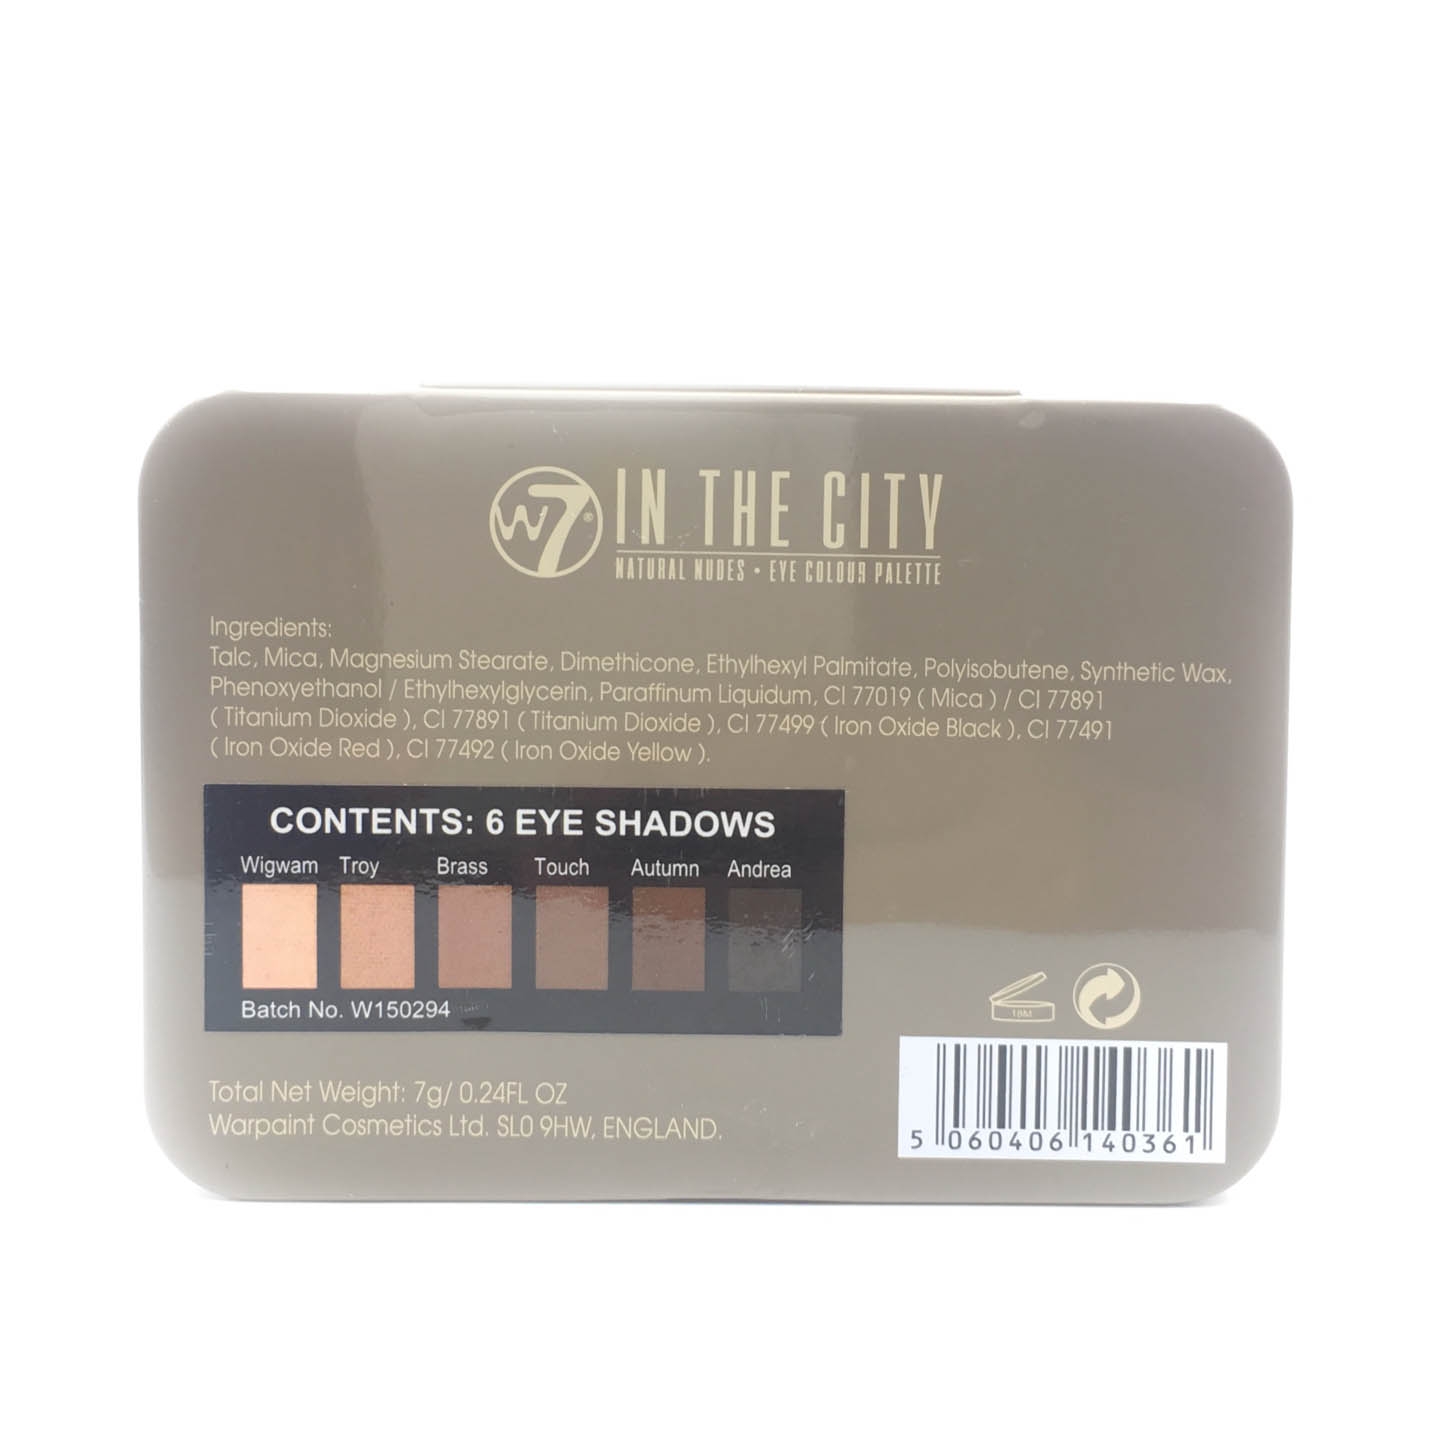 w7 In The City Natural Nute Eye Colour Sets and Palette